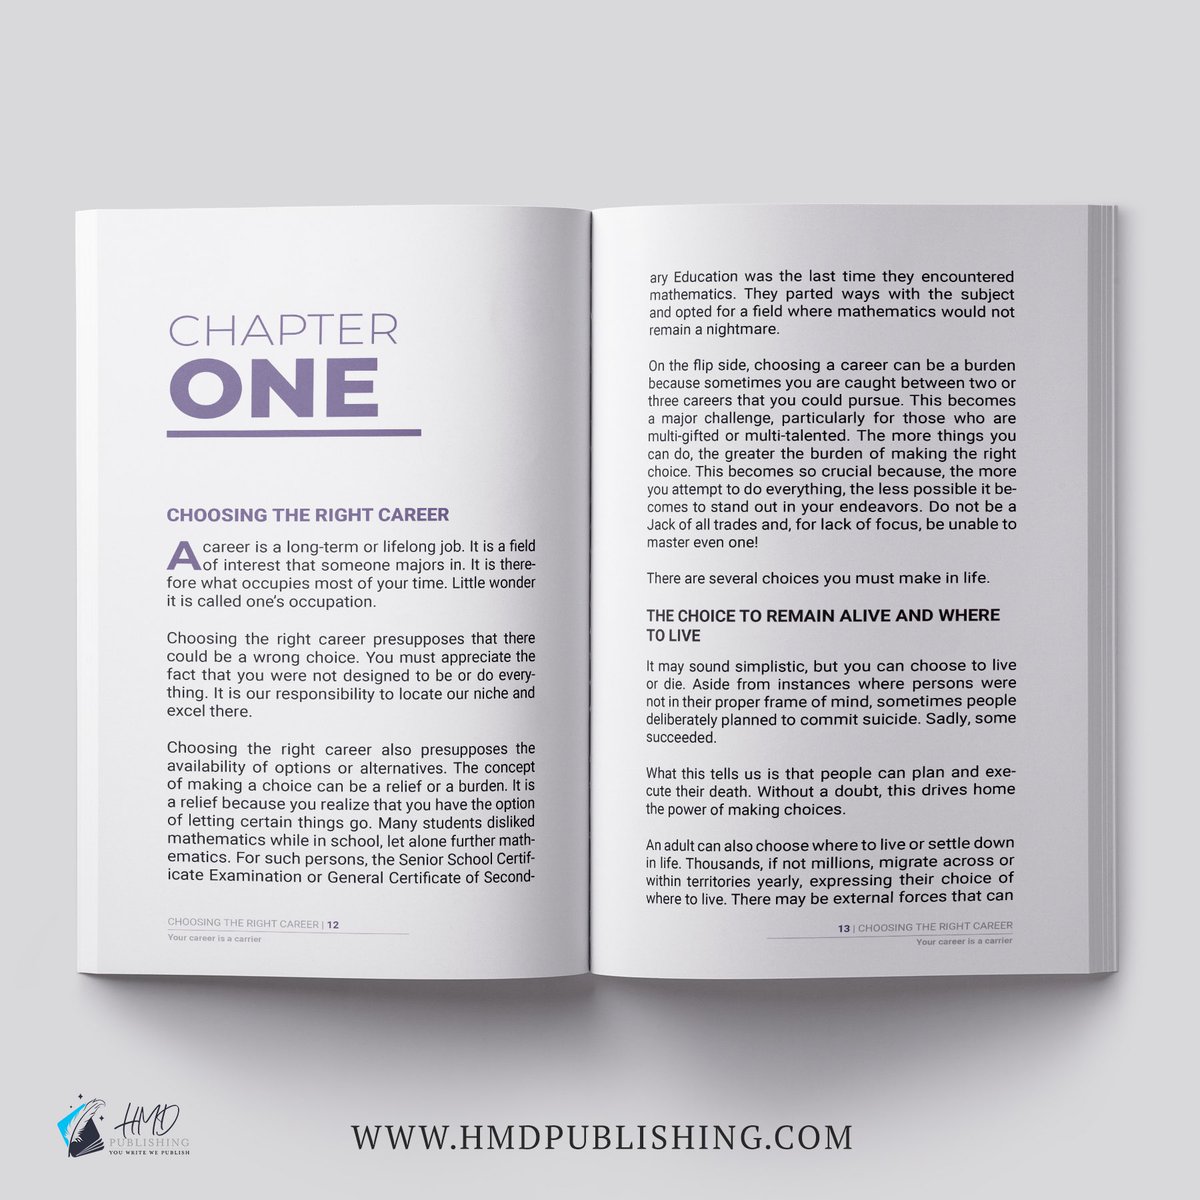 We are excited to announce the Book release “CHOOSING THE RIGHT CAREER“ by our client @DrOsaze , a comprehensive guide to help you find and thrive in the right career path for you.

Get your copy here:
rb.gy/e2x1mk 

#bookrelease #careerguide #business #selfpublish